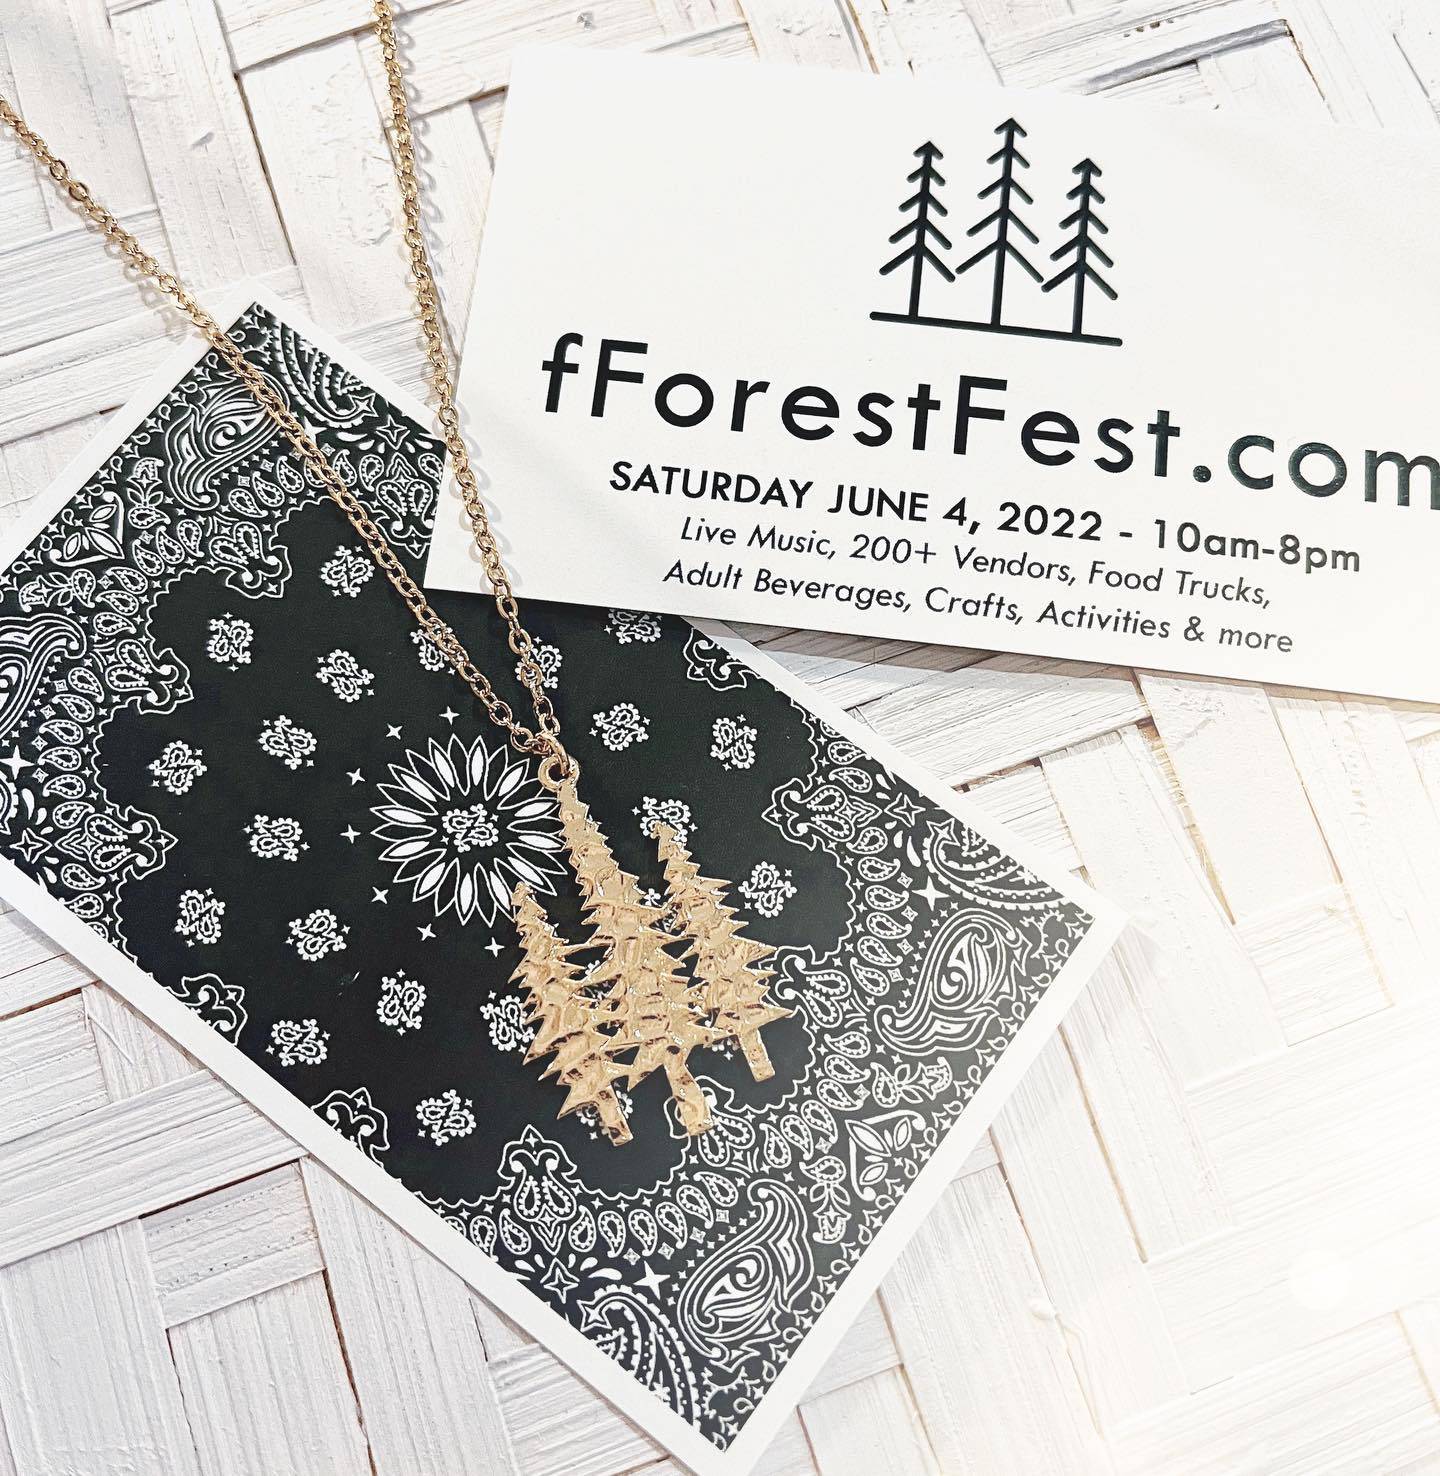 “Fforest Fest is a fun family day underneath the trees. It’s such a beautiful park and we really wanted somebody to do something- we’ve been talking about it for the last few years. Sometimes you you got to take the step and do it yourself,” said Stacey Olson, the owner of True North.